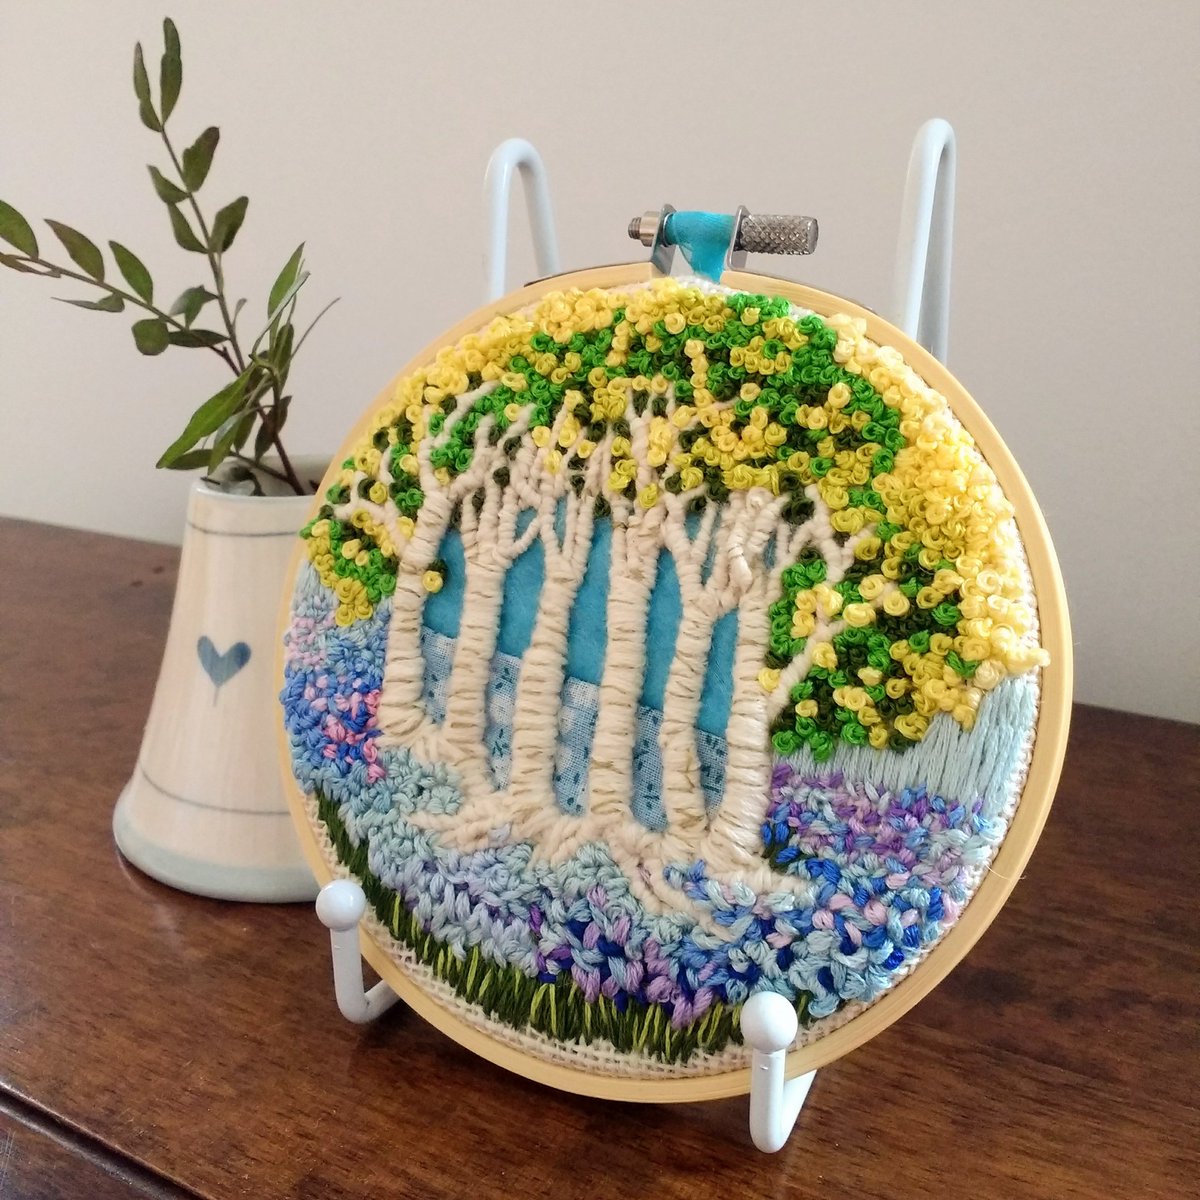 @HandmadeHour I've loved the bluebells on our woodland walks recently. This embroidered hoop version is available as a gift or keepsake idea etsy.com/shop/MarieJone… 
#HandmadeHour #embroideryart #textilecollage #homedecor #wallartforsale #bluebells #embroideryhoopart #art #gift